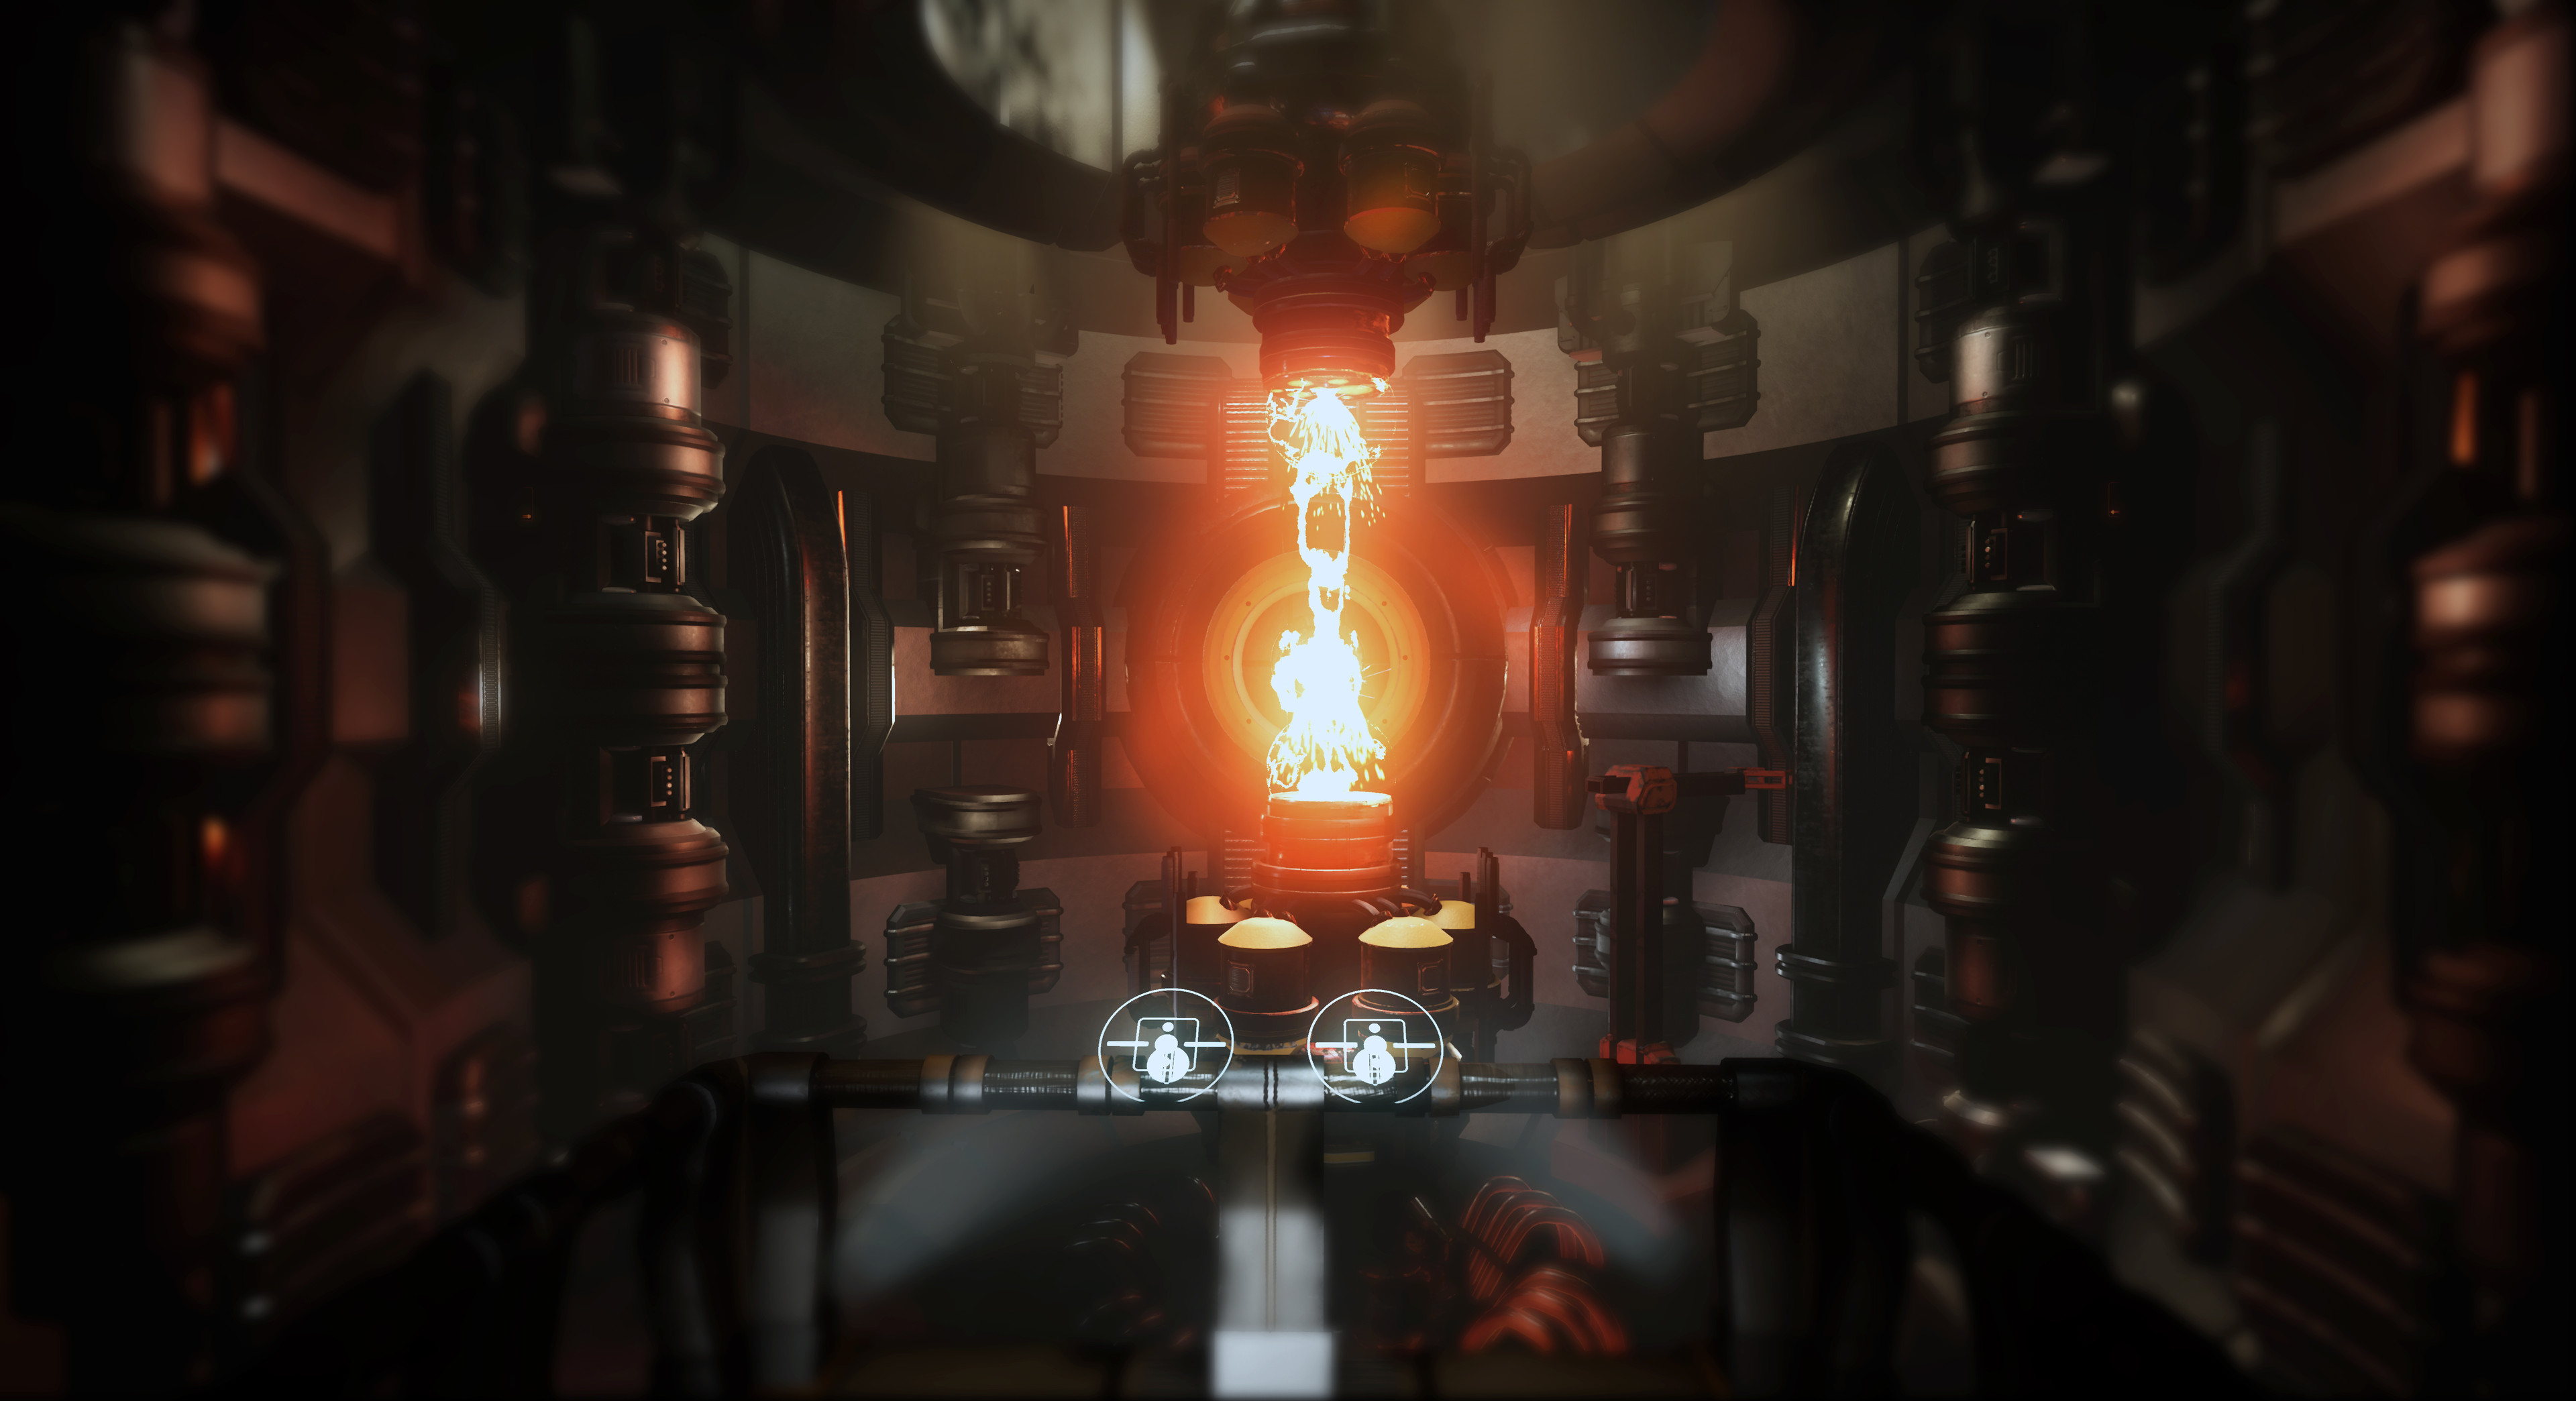 The final area is the main reactor room. In a shout-out to our favorite Halo games, the player must destroy the reactor, causing the destruction of the space station.